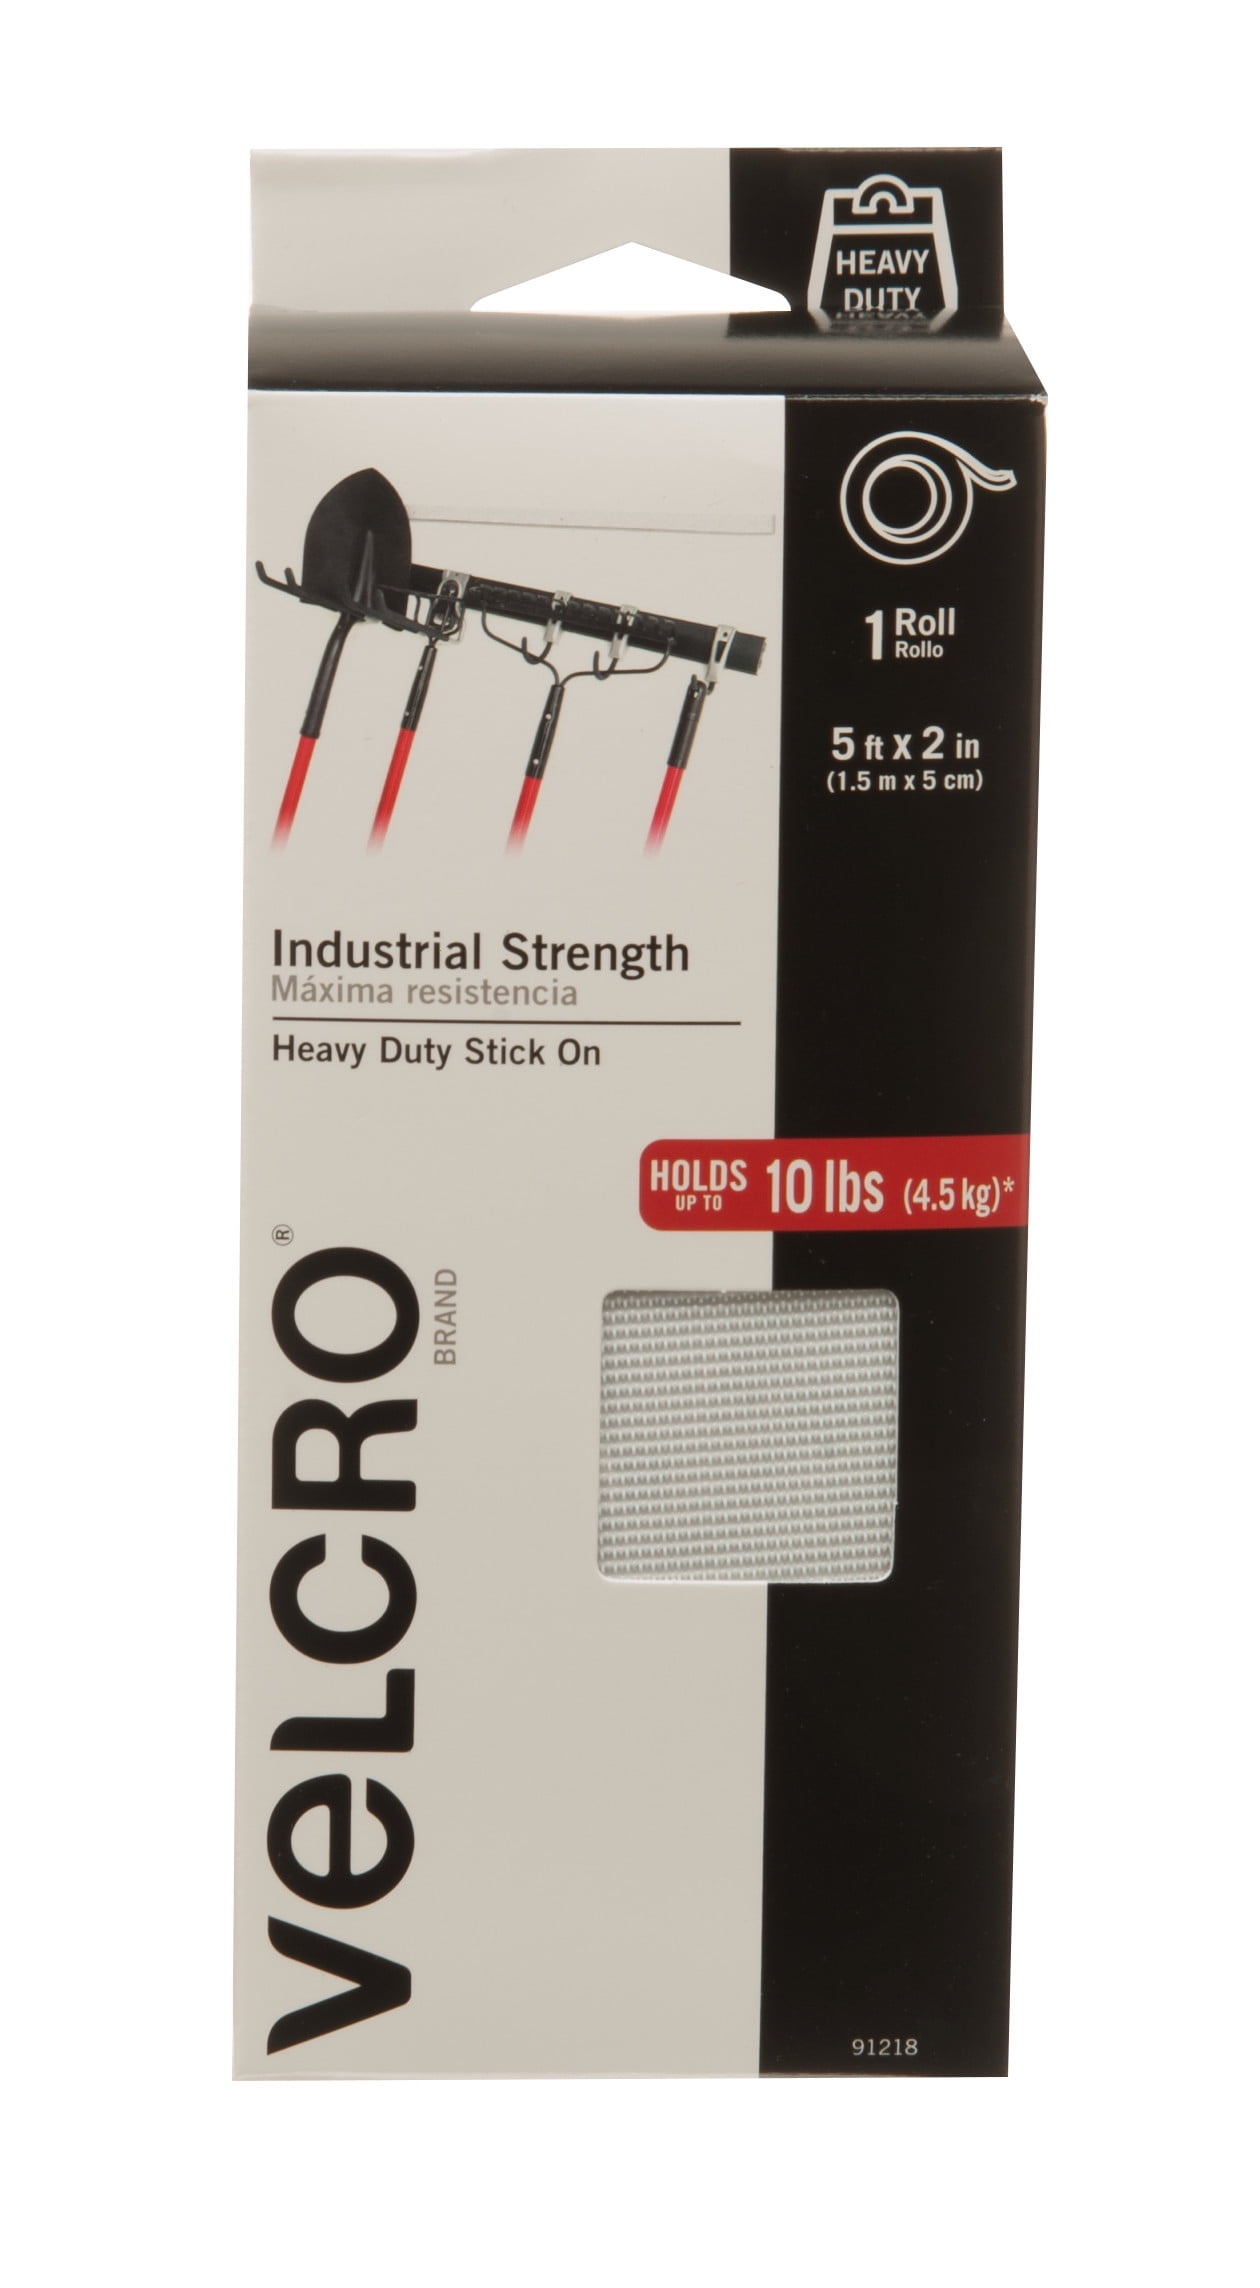 VELCRO Brand Strength, Indoor & Outdoor Use, Superior Holding Power on Smooth 5' 2" Roll (91218) - Walmart.com